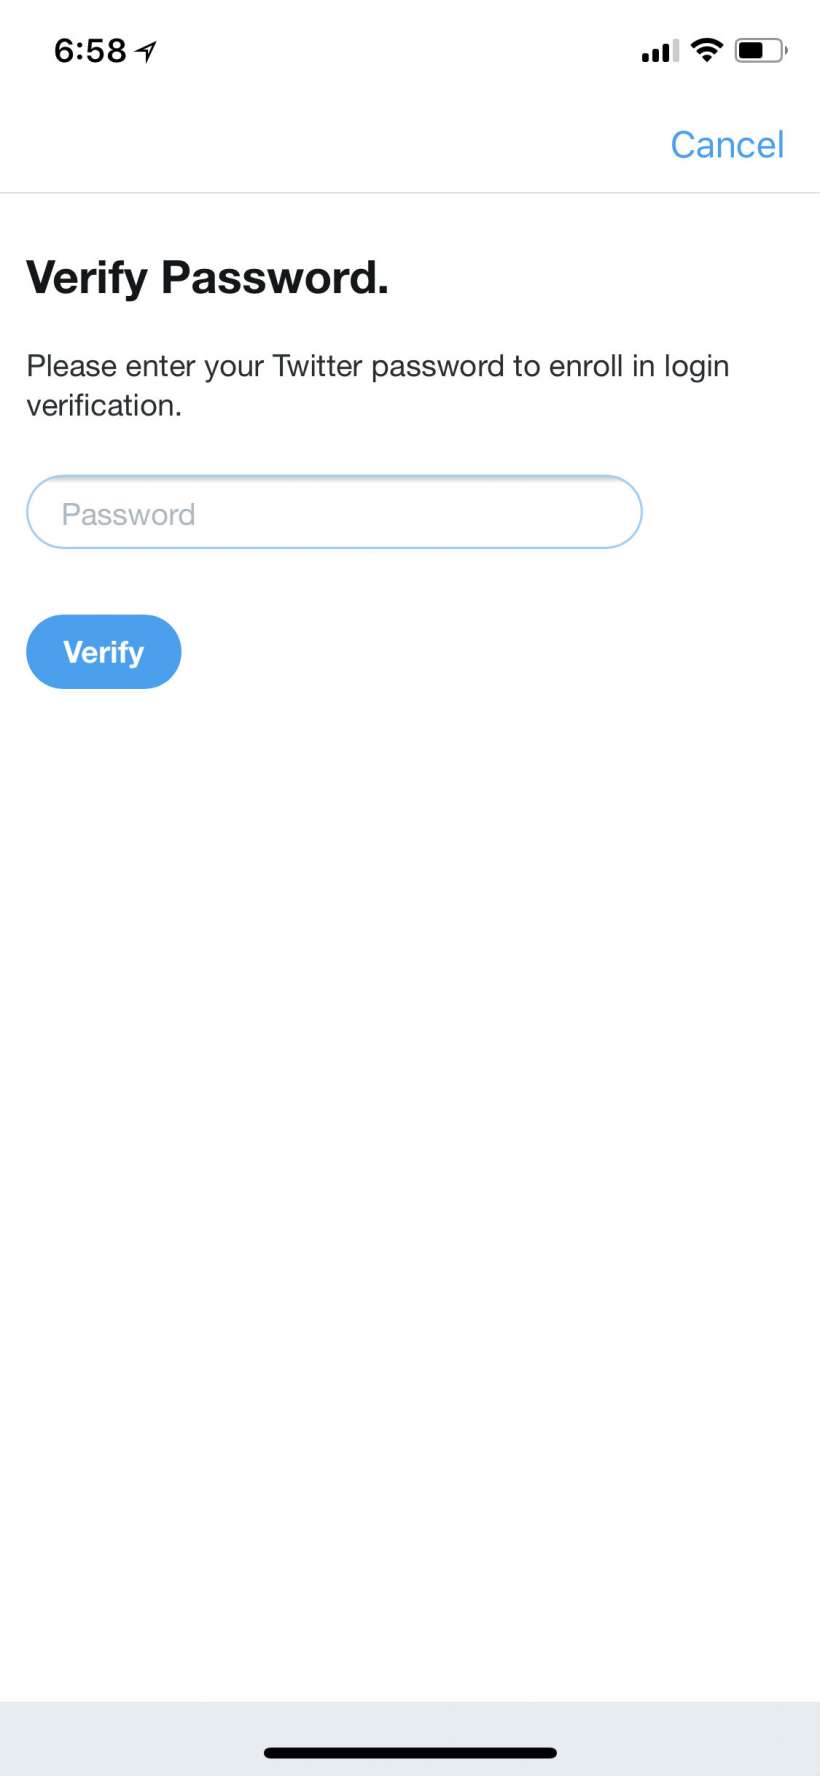 How to change your Twitter password and activate login verification.